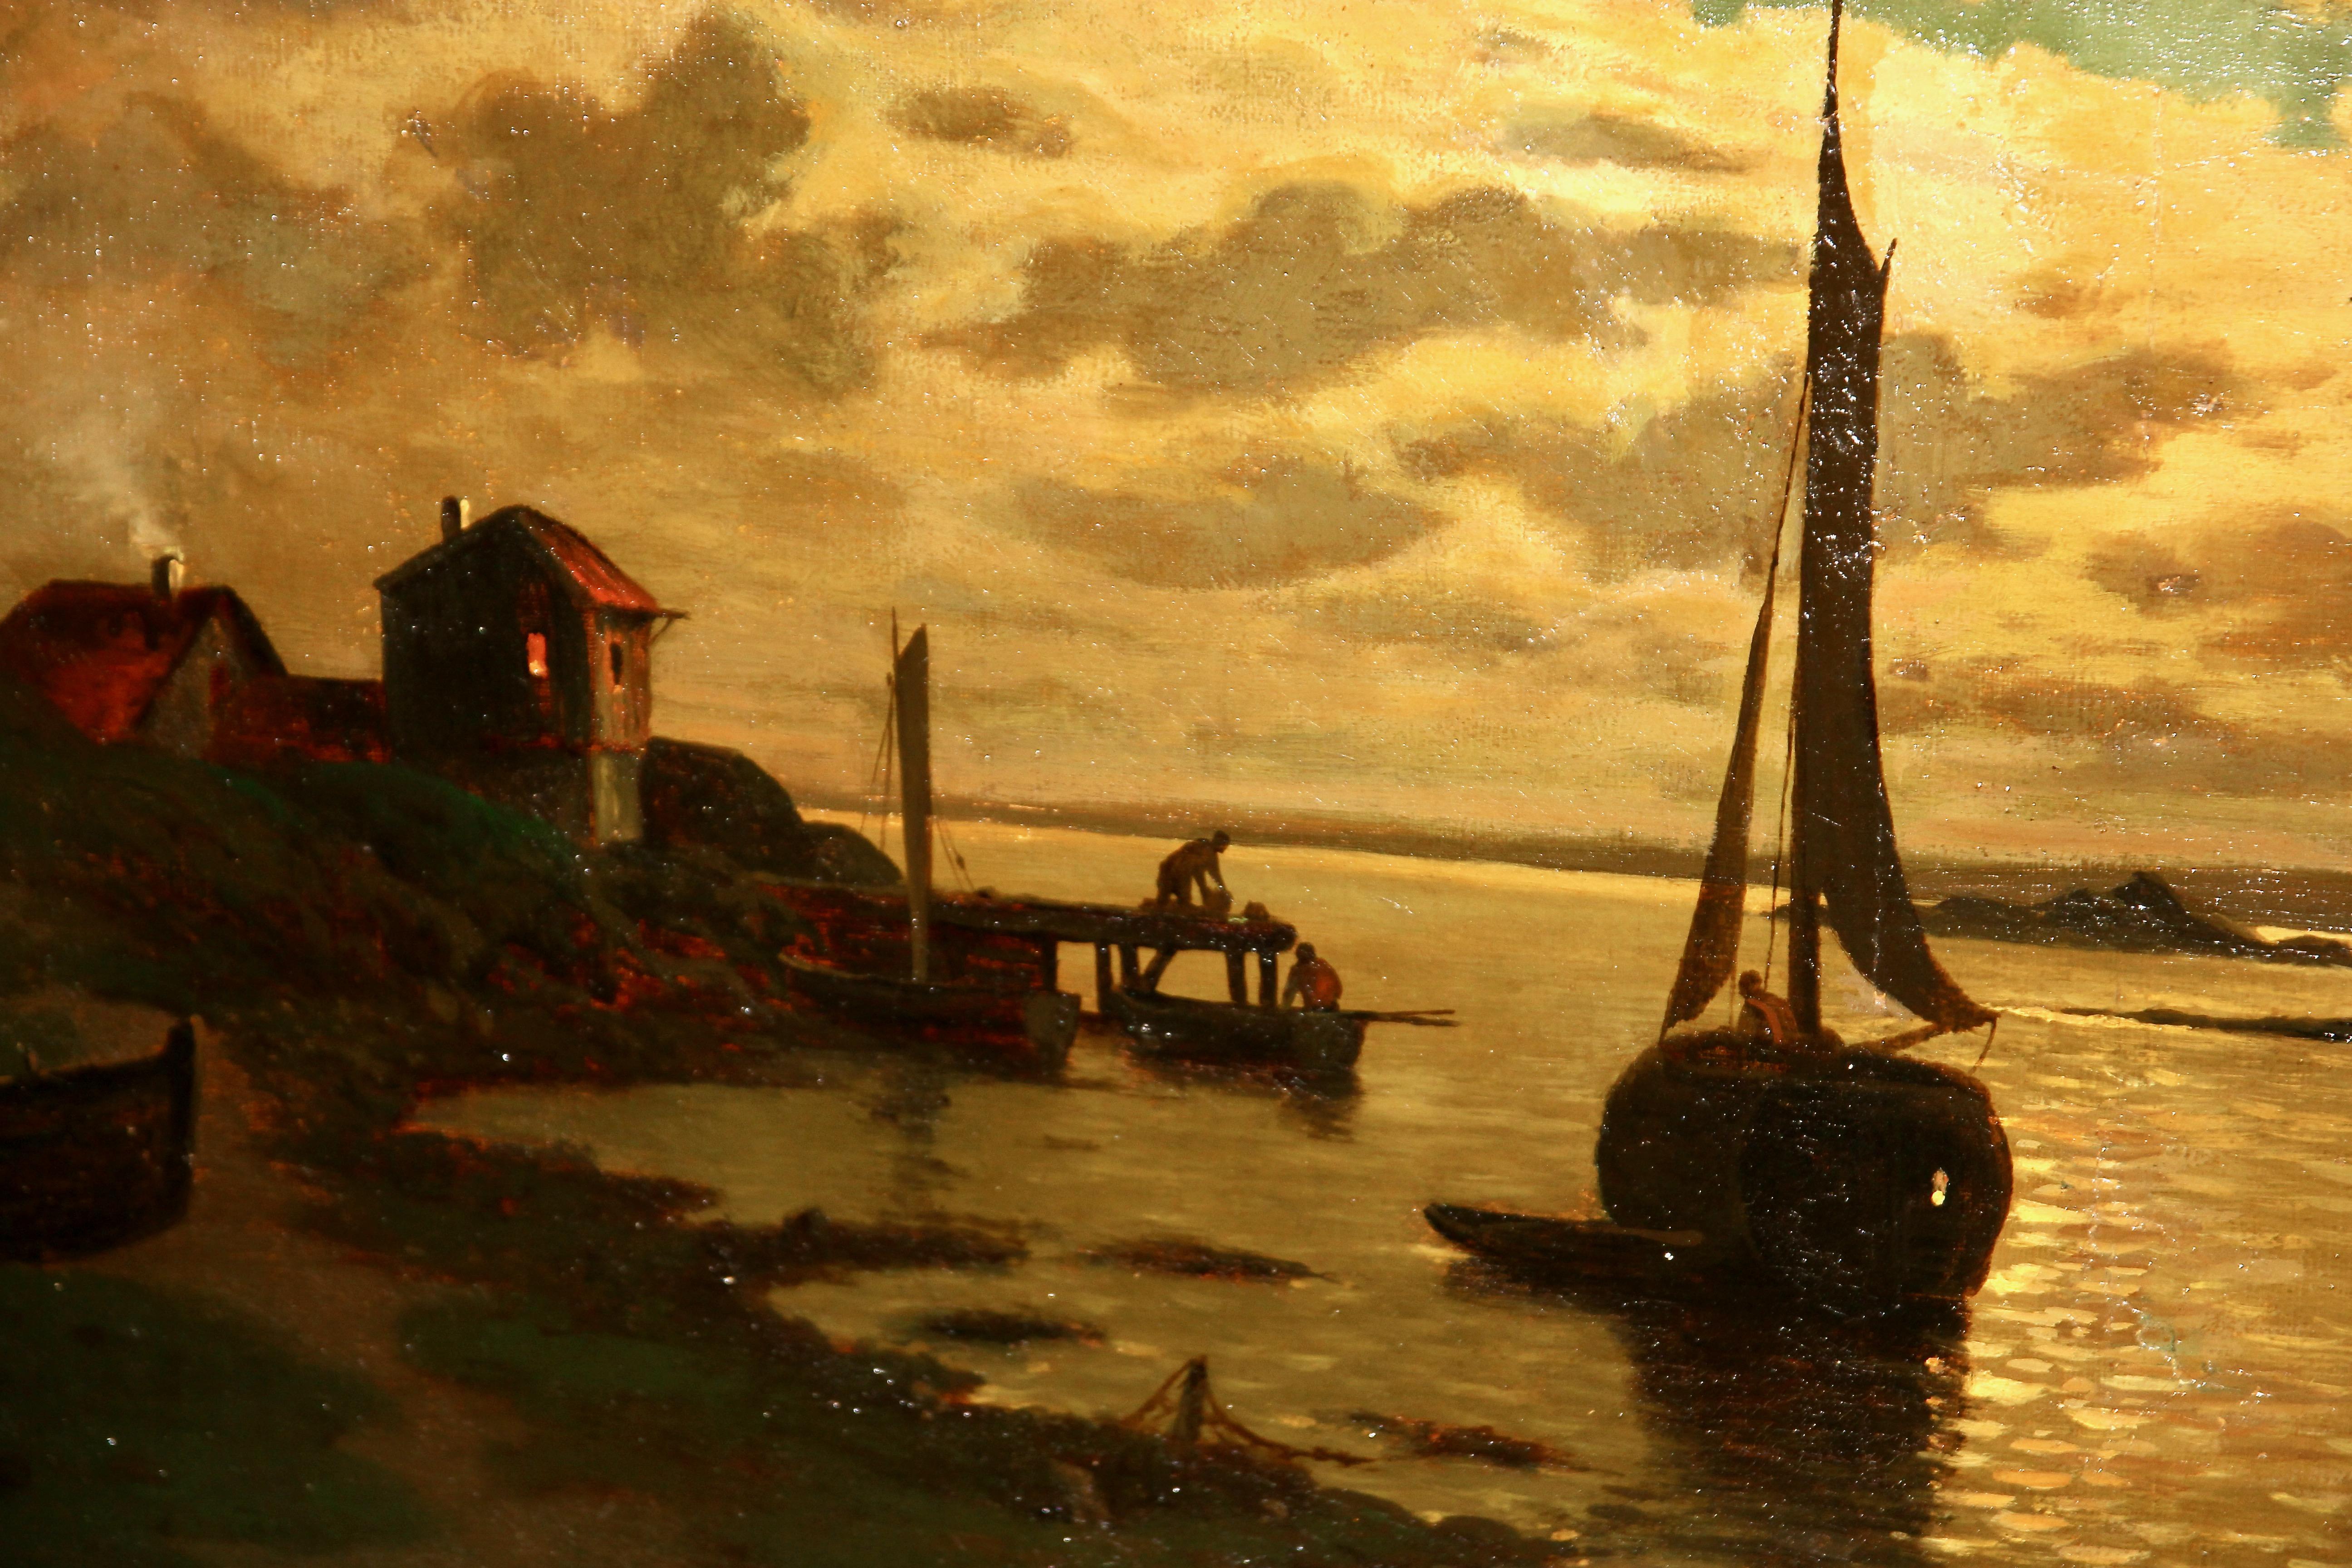 A. Kreutzer, 19th century, fishing boats in the moonlight, painting, oil on canvas. Nocturnal coastal landscape.

Age-related condition.
Frame damaged in places.

Dimensions without frame 55.5 cm x 82 cm
Dimensions including frame 83 cm x 109.5 cm